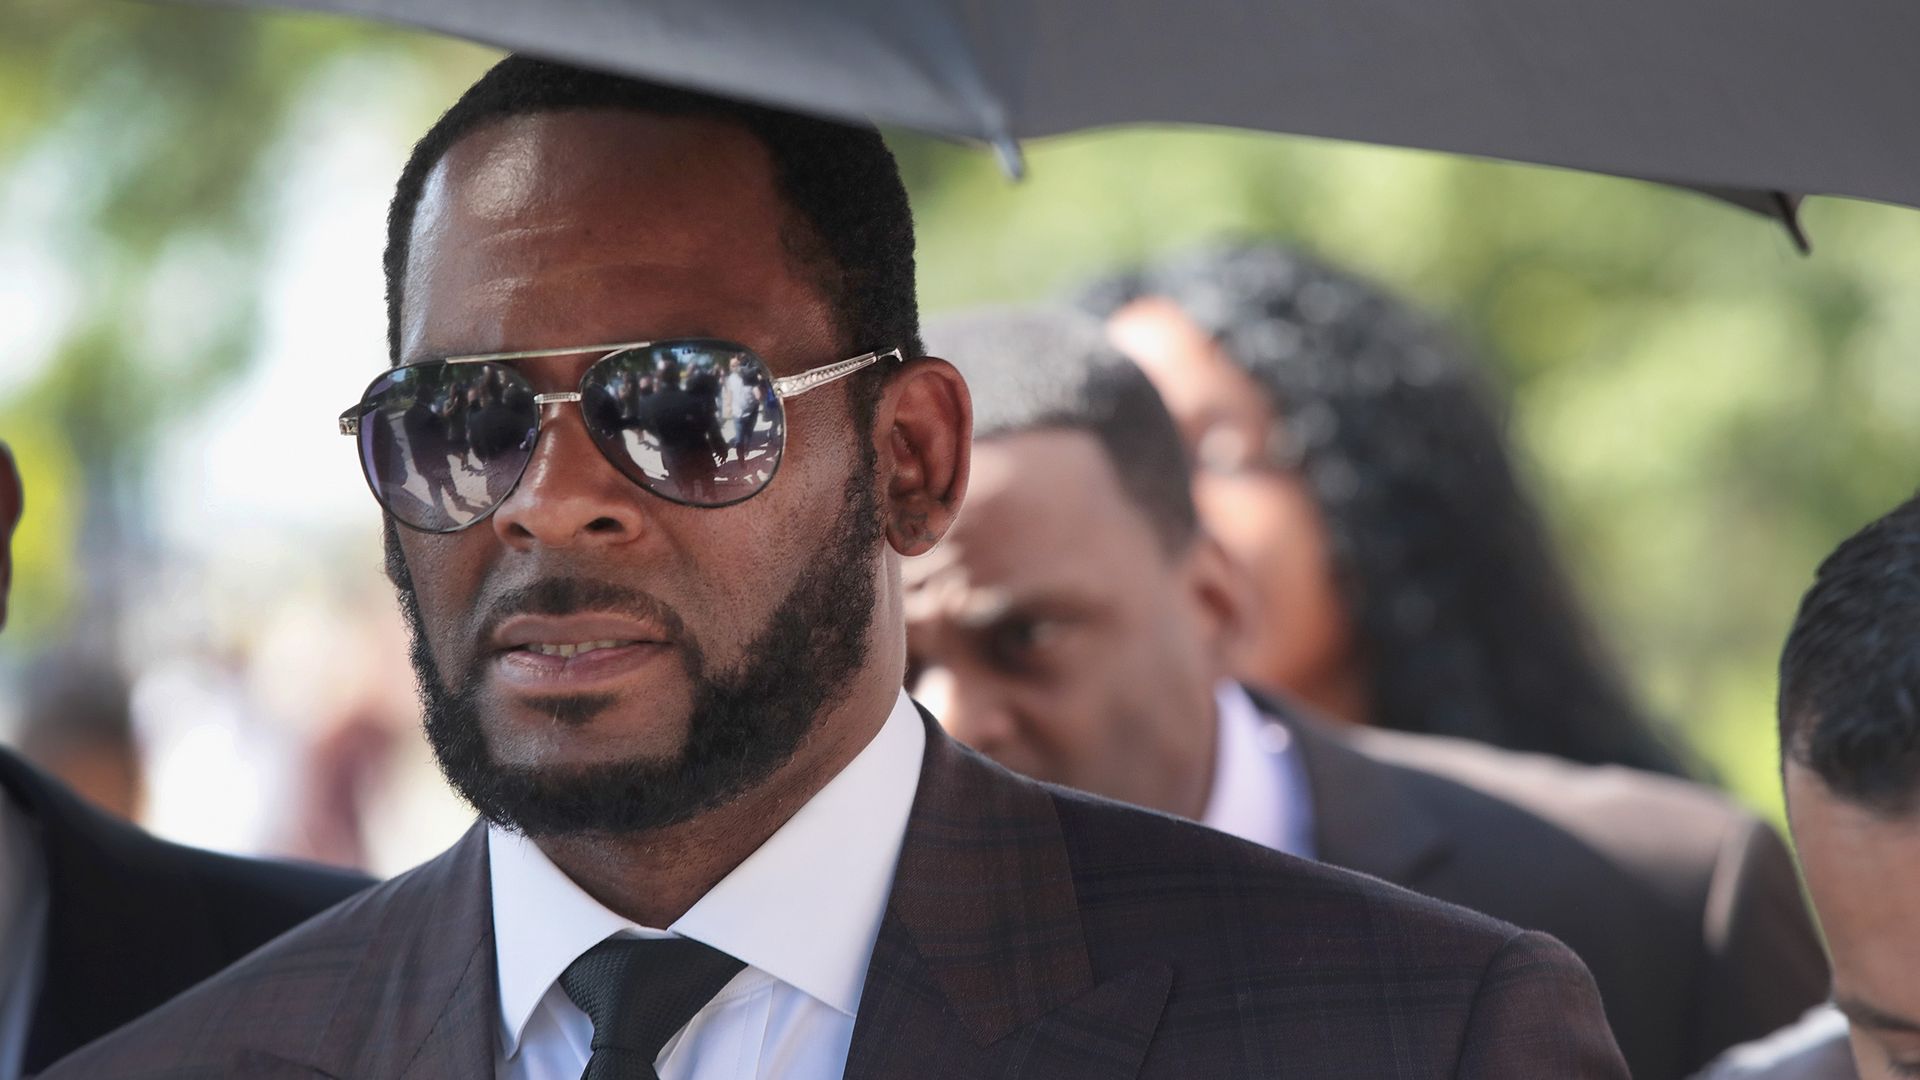 R. Kelly leaves the Leighton Criminal Courts Building following a hearing on June 26, 2019 in Chicago